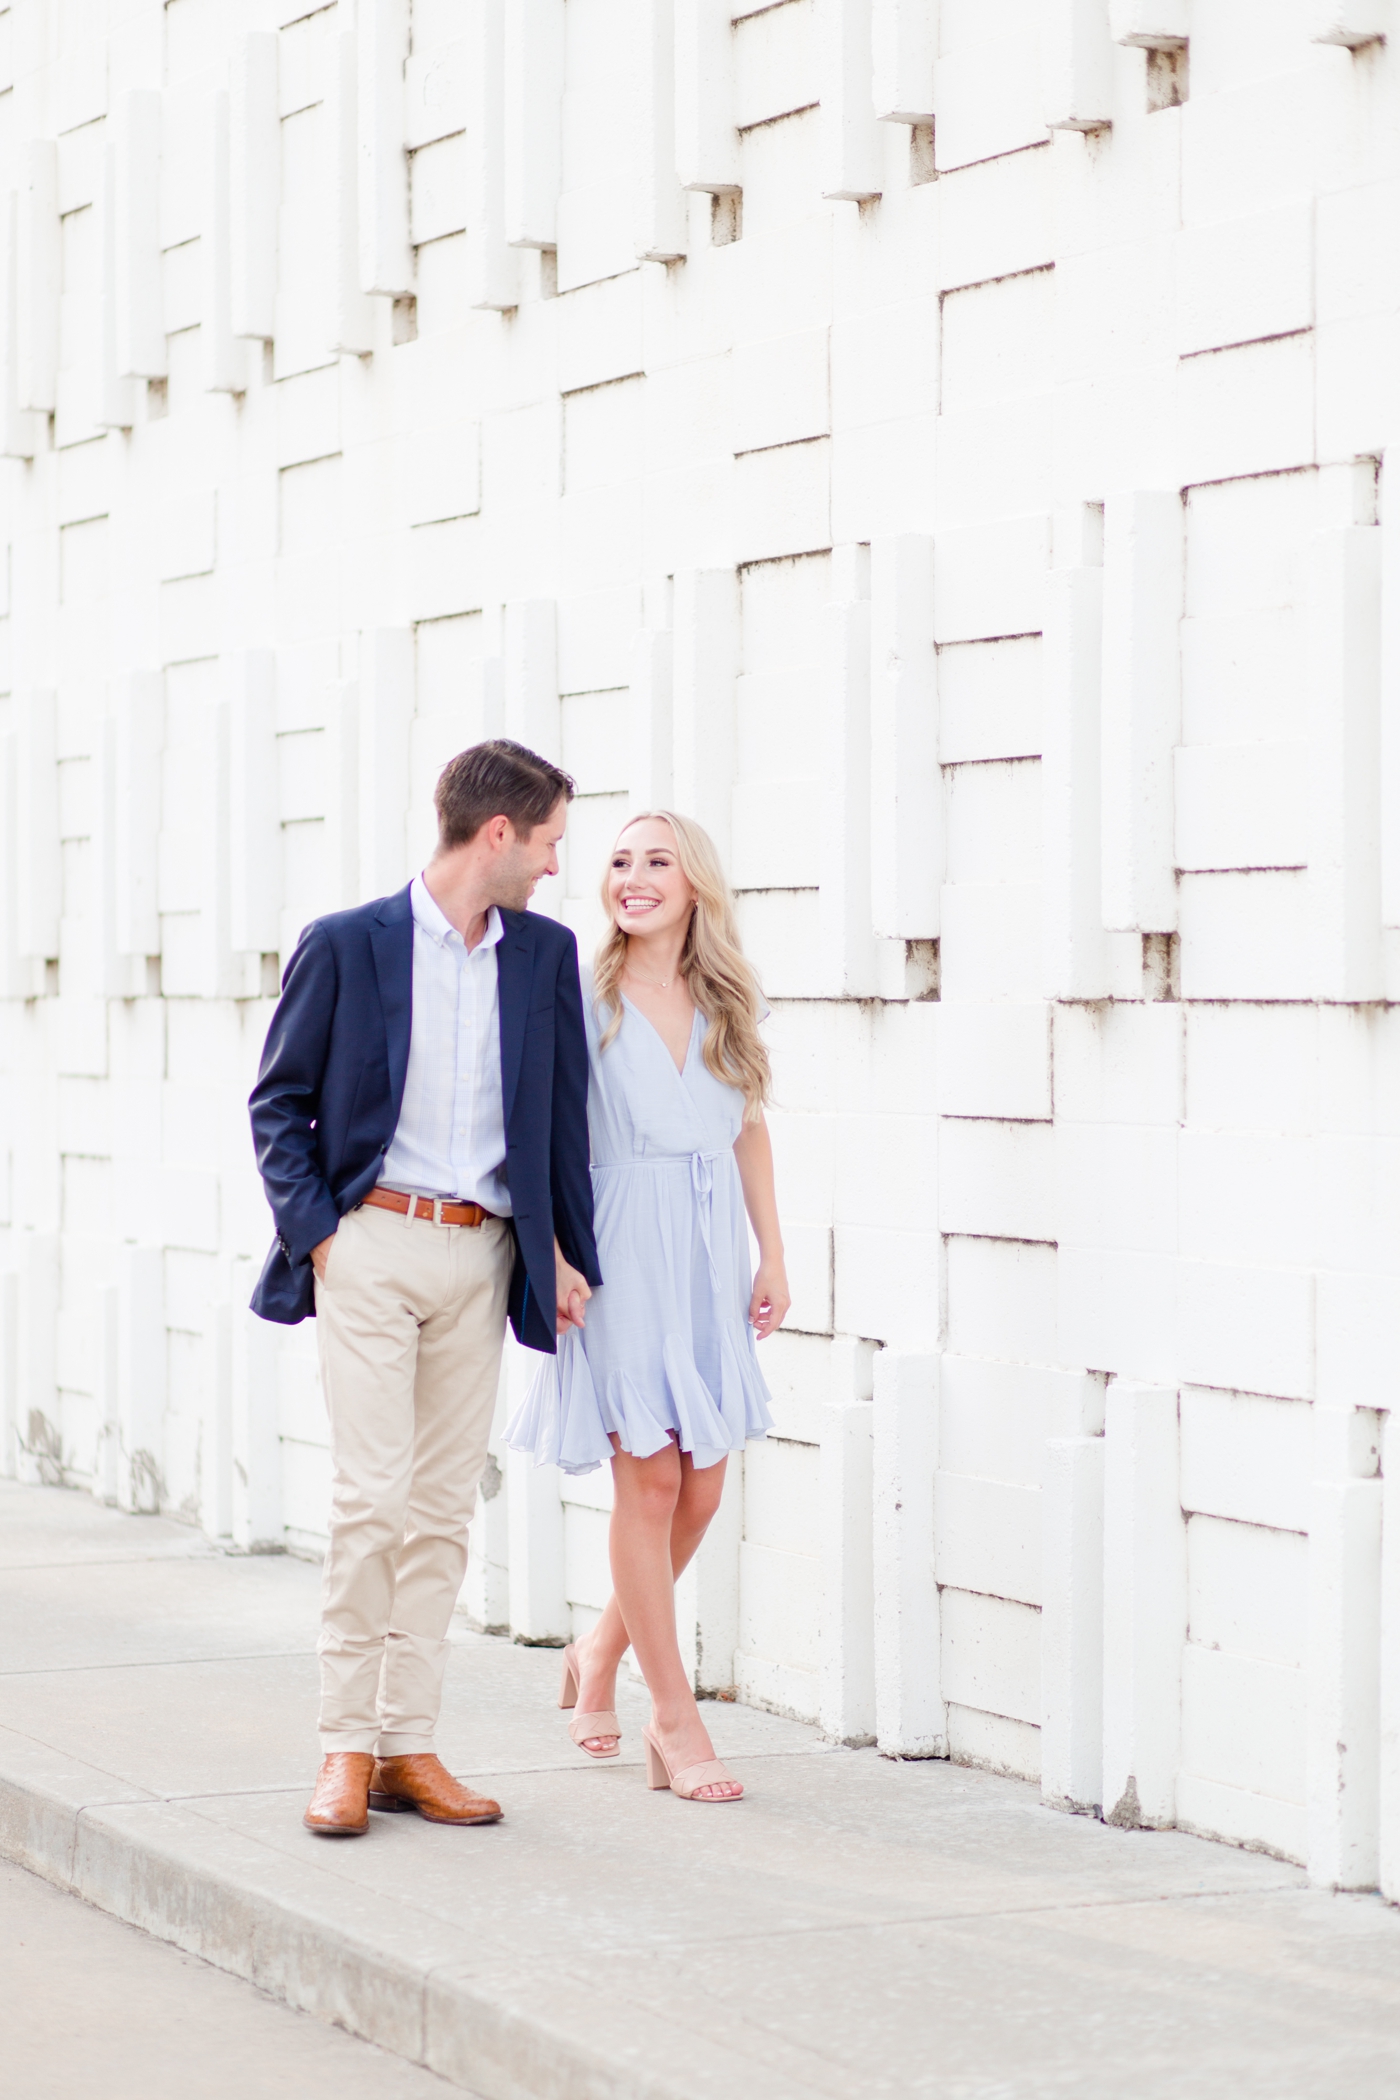 Formal engagement session in downtown Tulsa